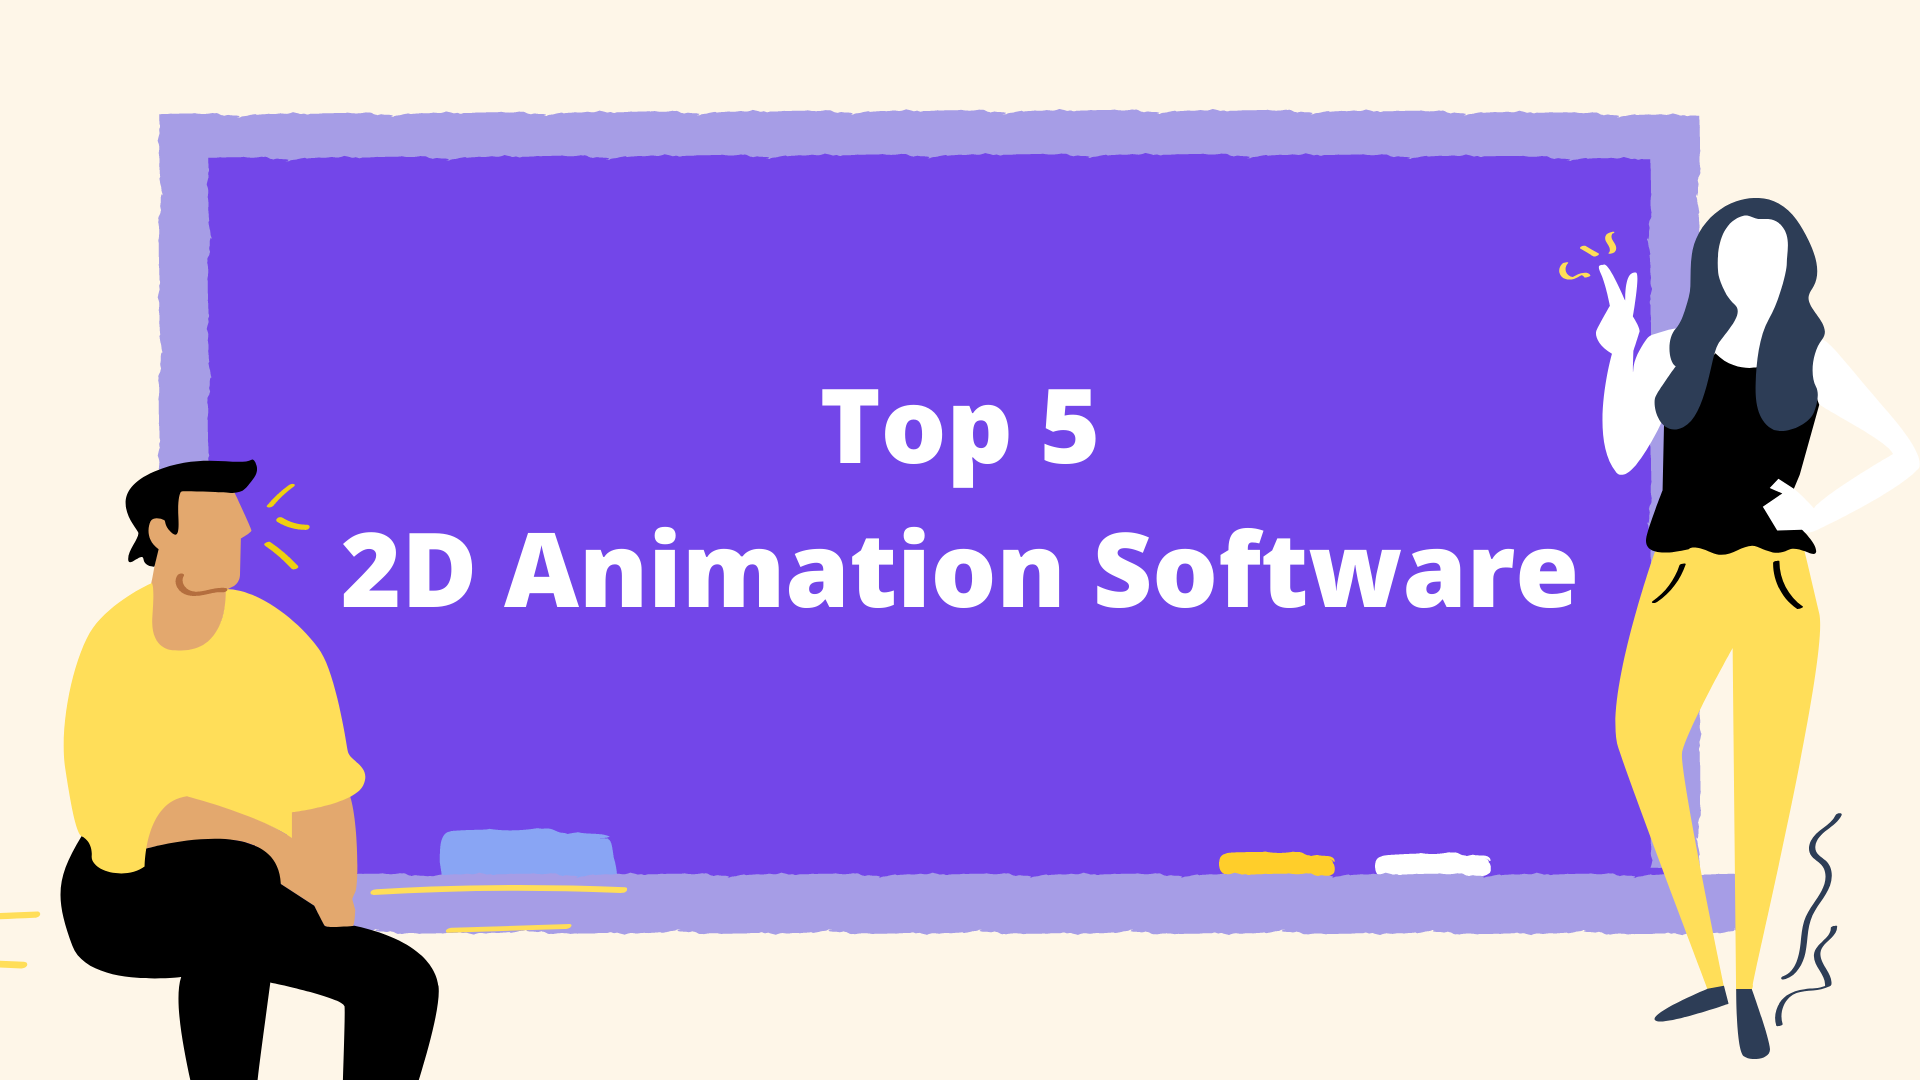 Top 5 2D Animation Software! | The Startup Videos